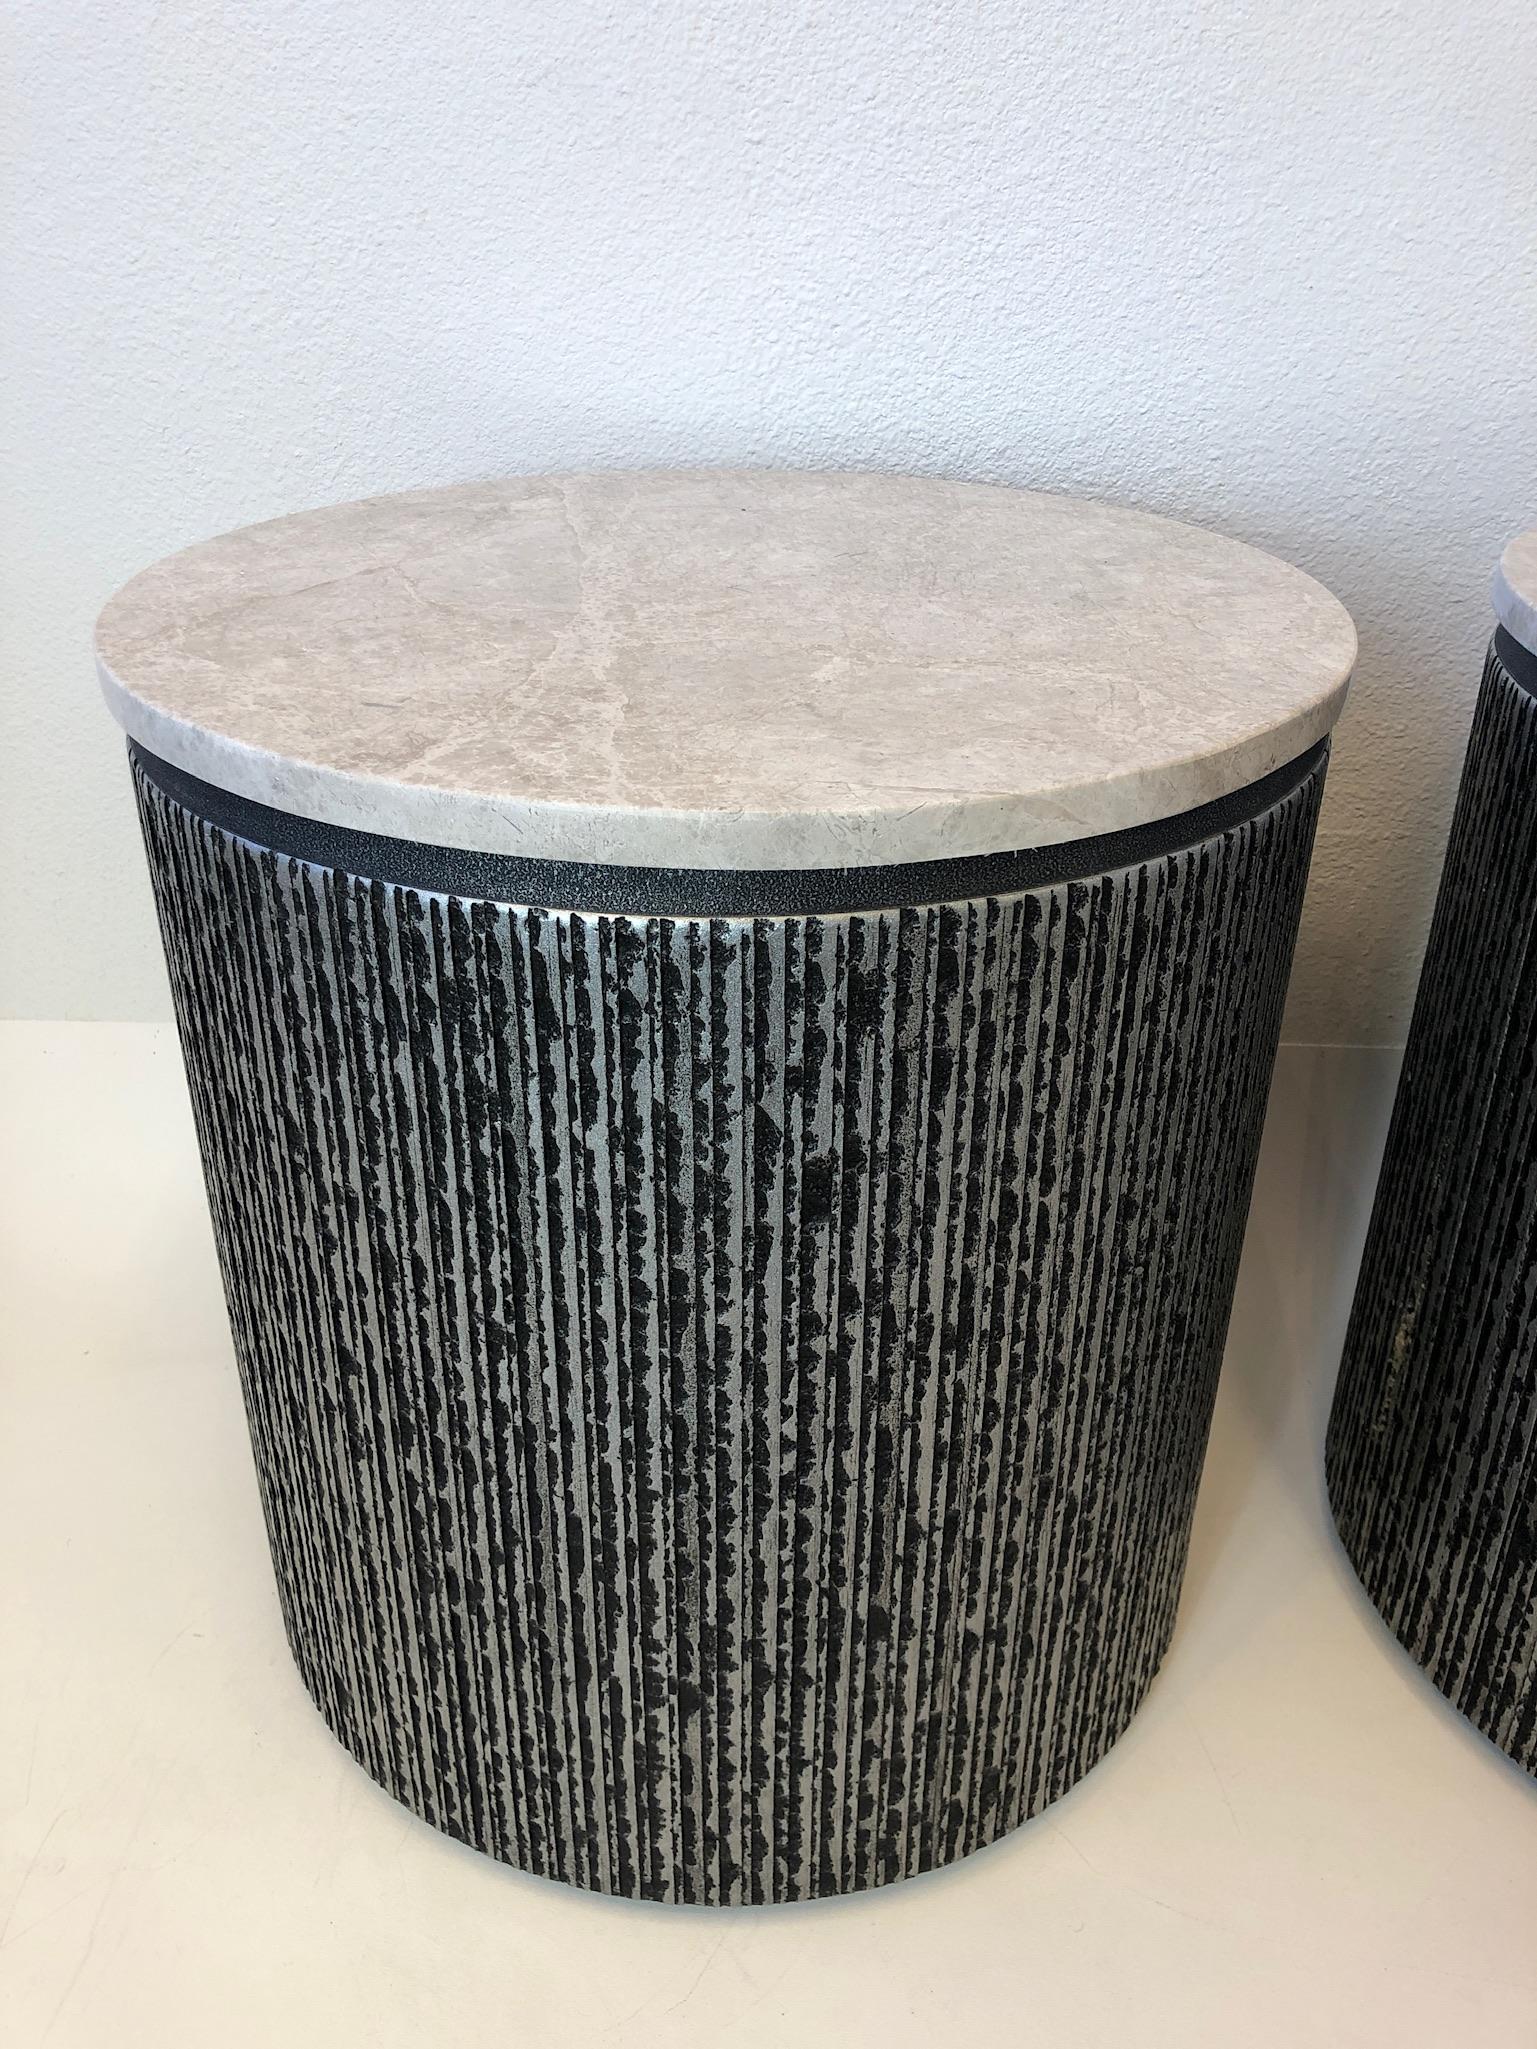 Fiberglass Brutalist Pair of Drum Side Table by Form and Surfaces for Steve Chase